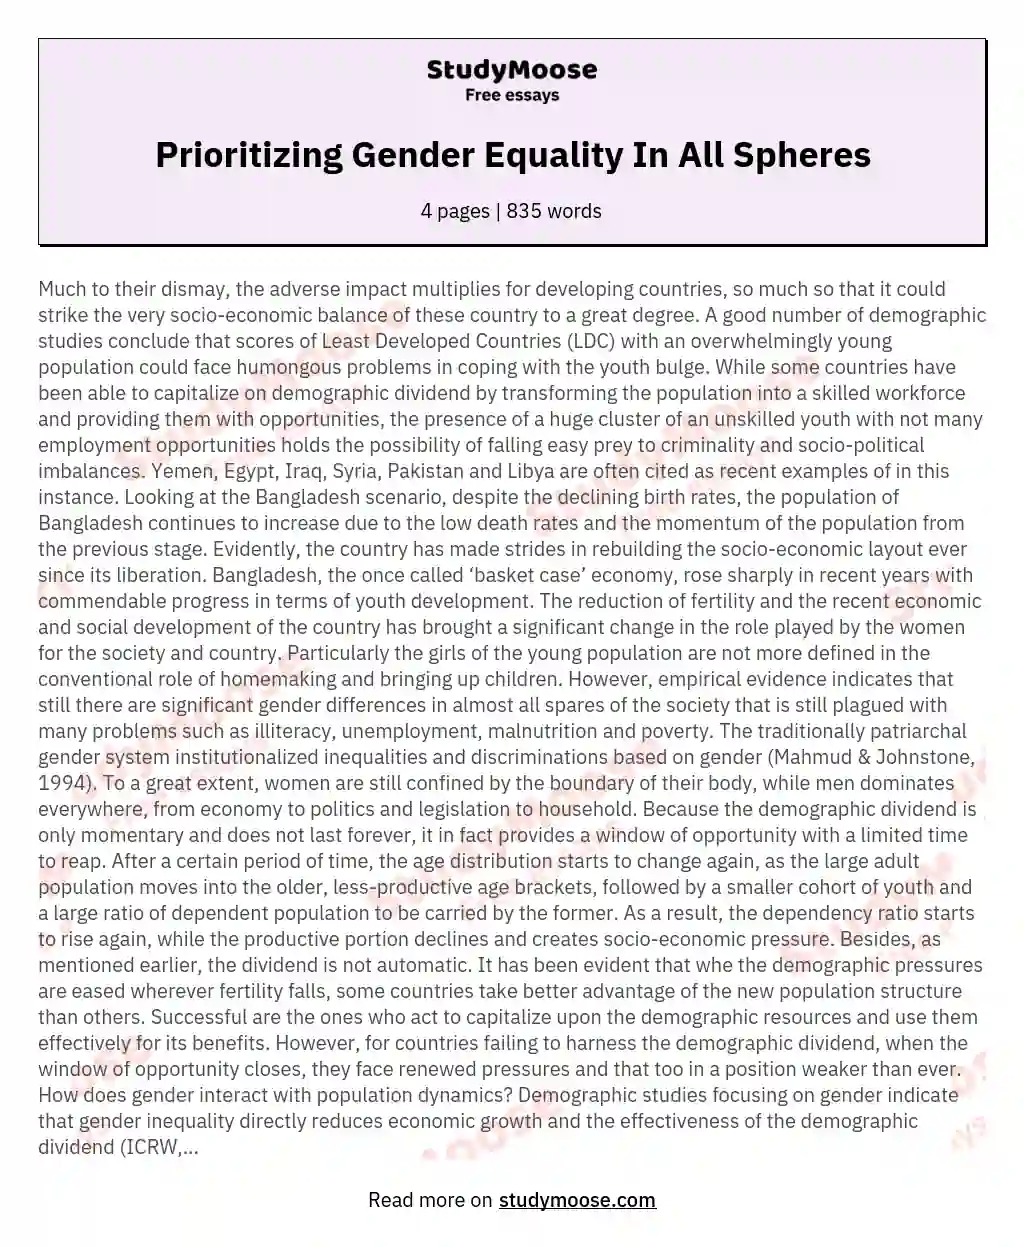 Prioritizing Gender Equality In All Spheres essay